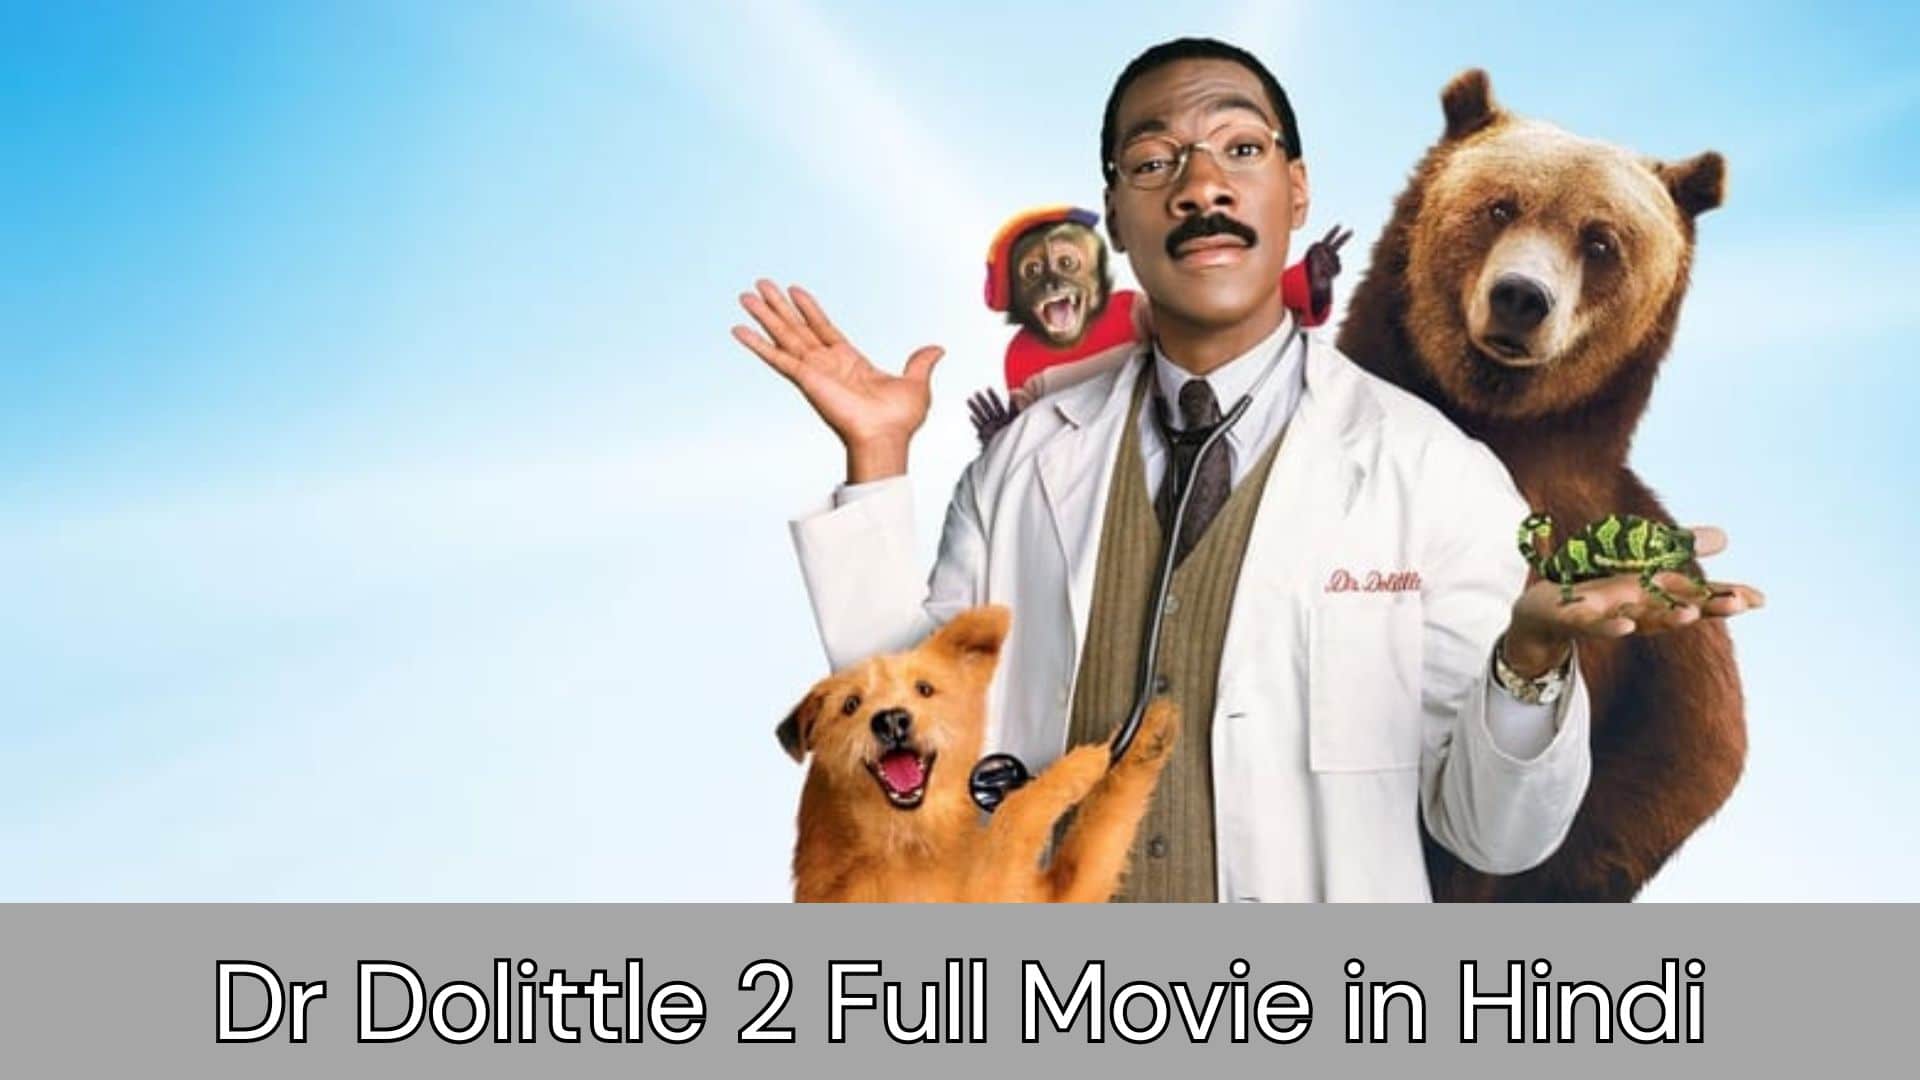 Dr Dolittle 2 full movie in hindi dubbed download filmywap, filmyzilla, filmyhit, mp4moviez